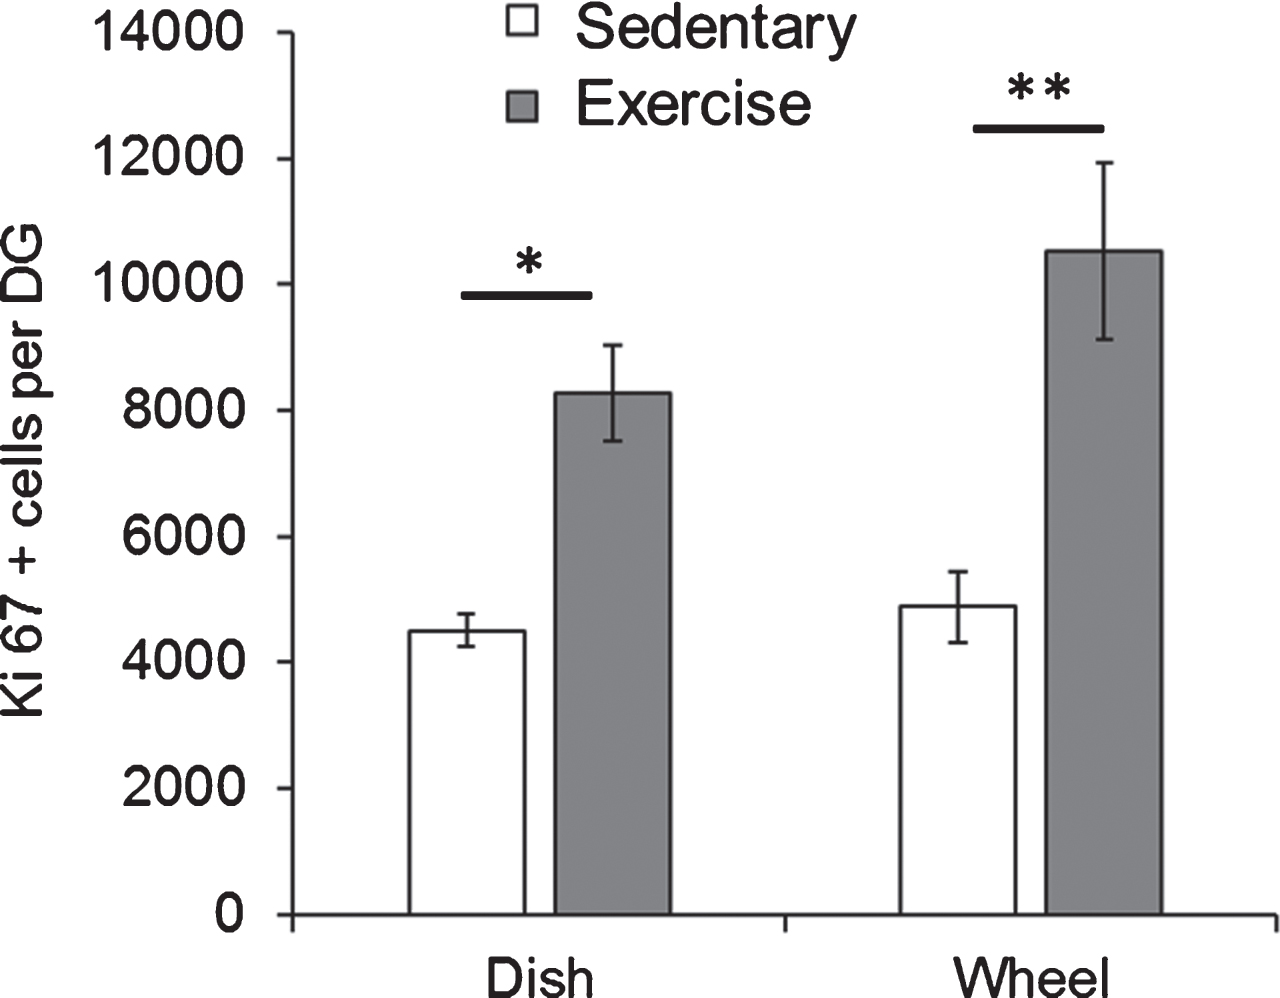 Both dish running and wheel running significantly enhanced hippocampal cell proliferation in Fmr1 KO mice. Short-term running on wheels and dishes significantly increased the number of Ki67 positive proliferating cells in Fmr1 KO mice. *p < 0.05; **p < 0.005.